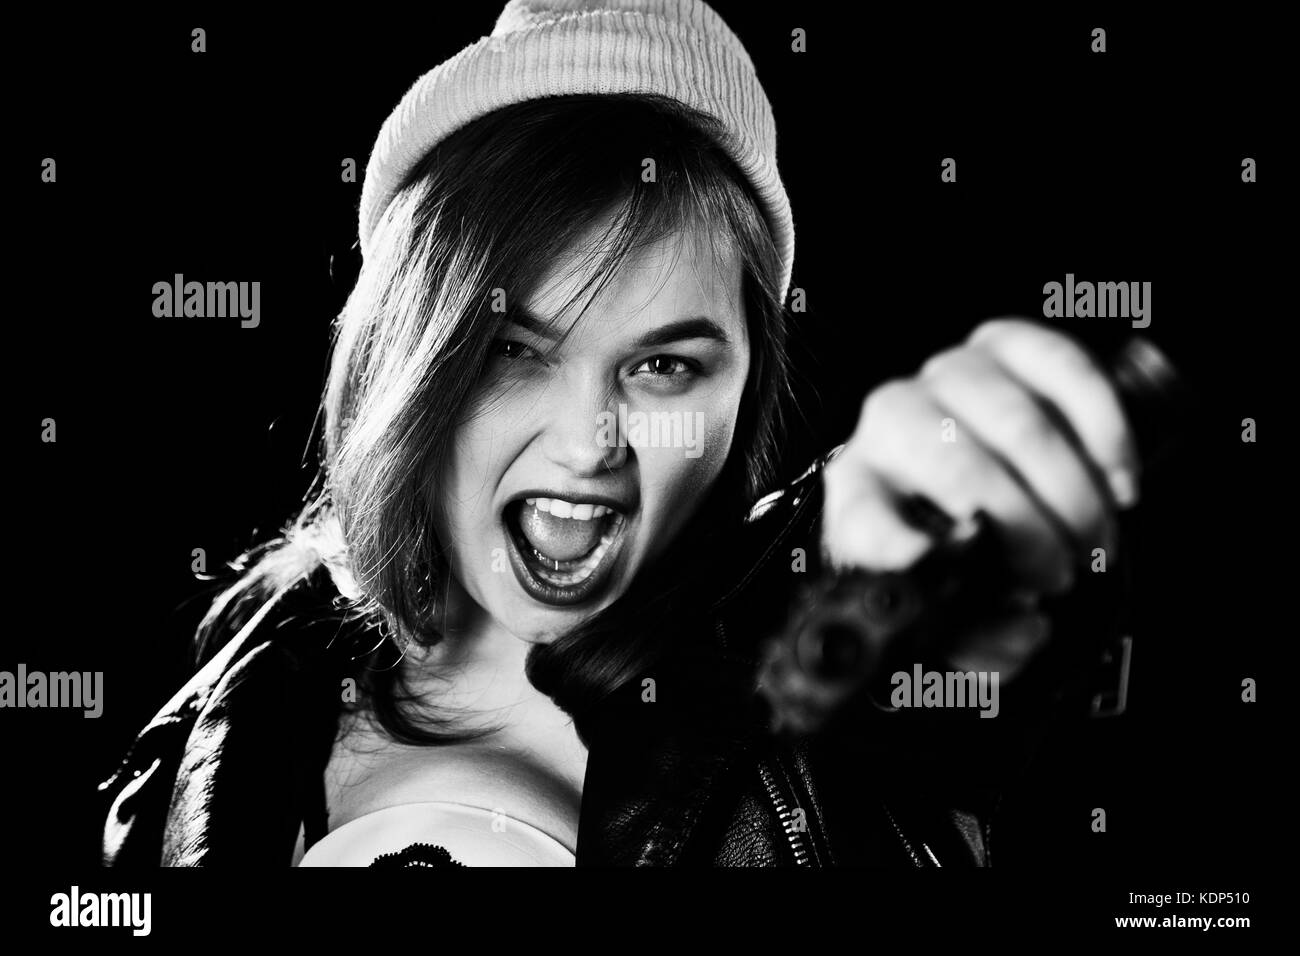 serious girl with gun on black background aiming at camera, screaming, monochrome Stock Photo